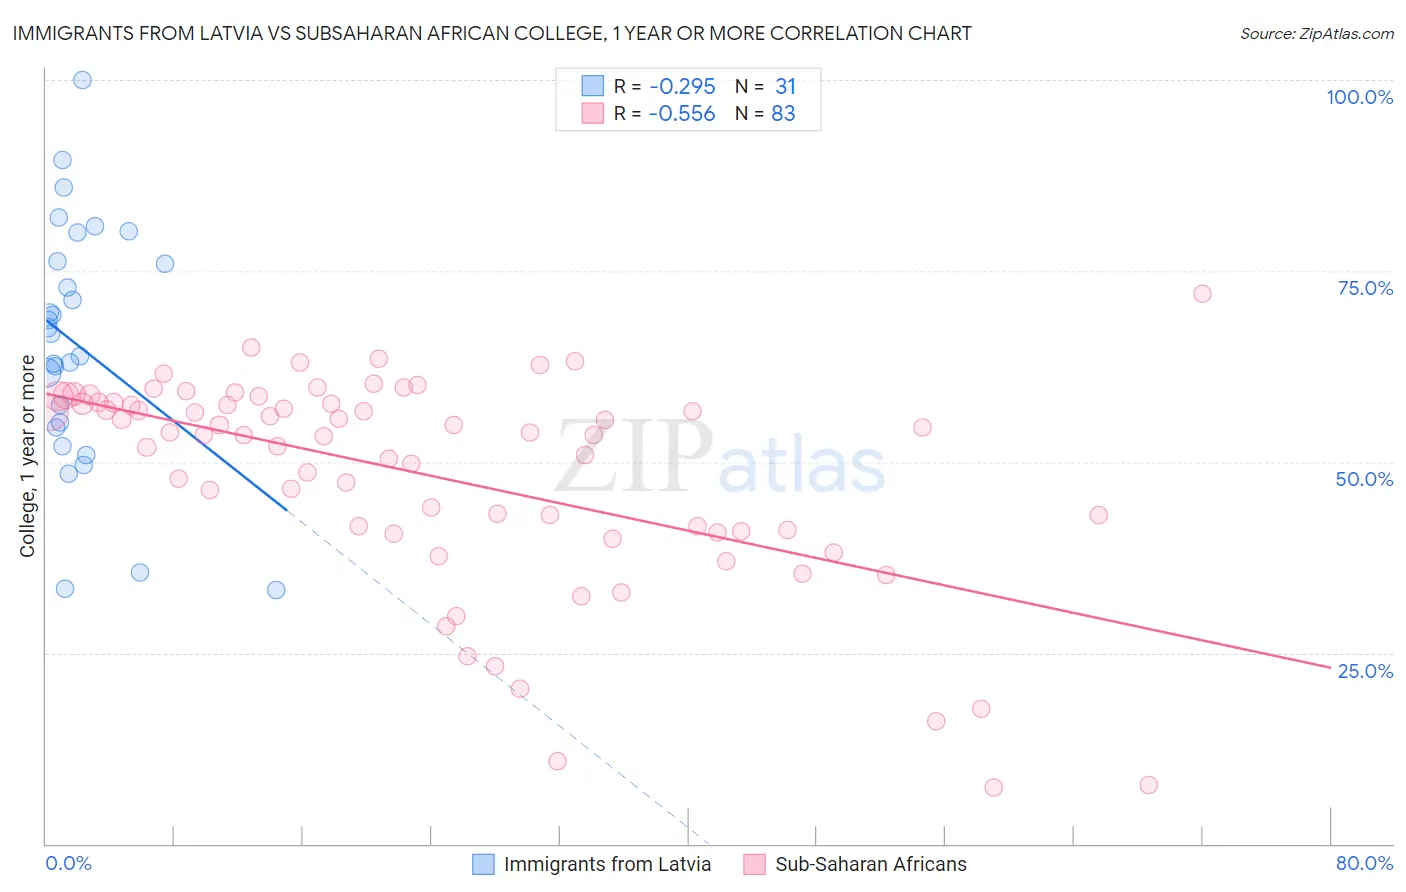 Immigrants from Latvia vs Subsaharan African College, 1 year or more